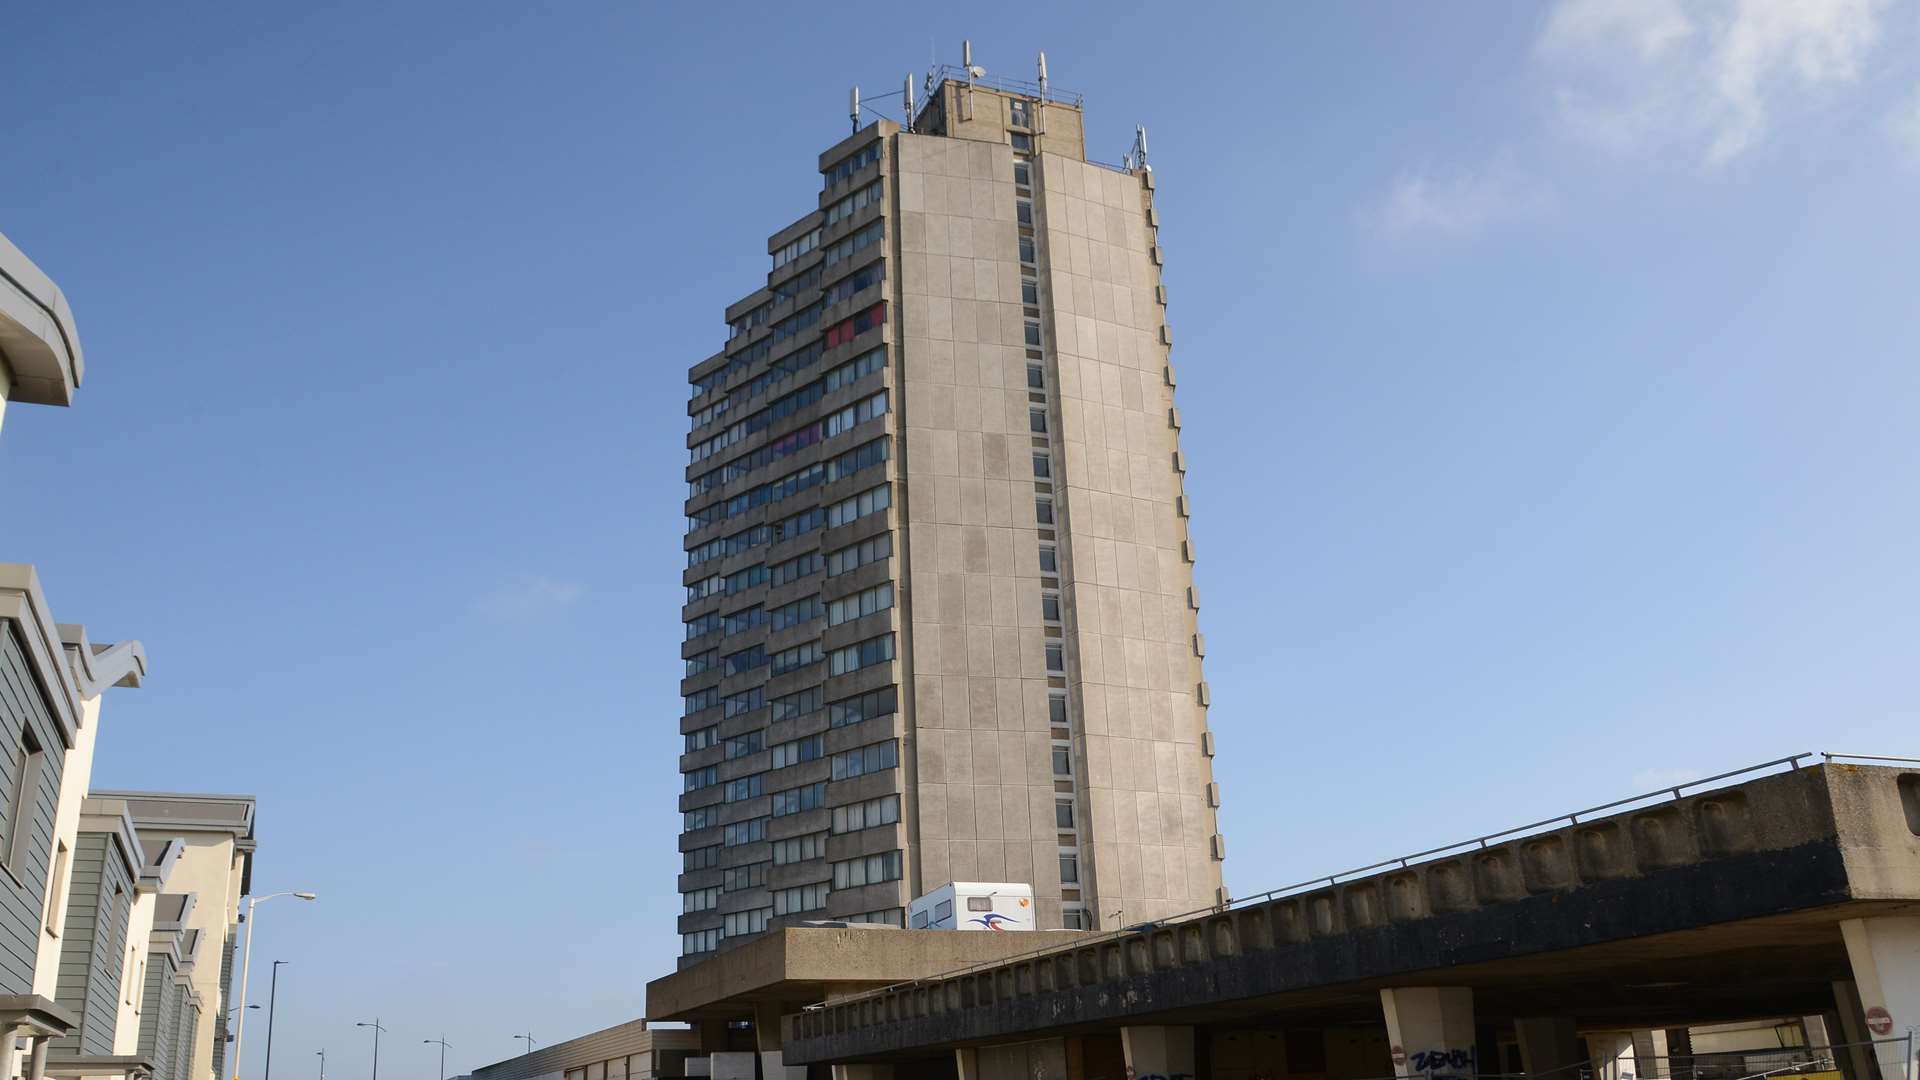 Arlington House in Margate, one of Thanet's tower blocks